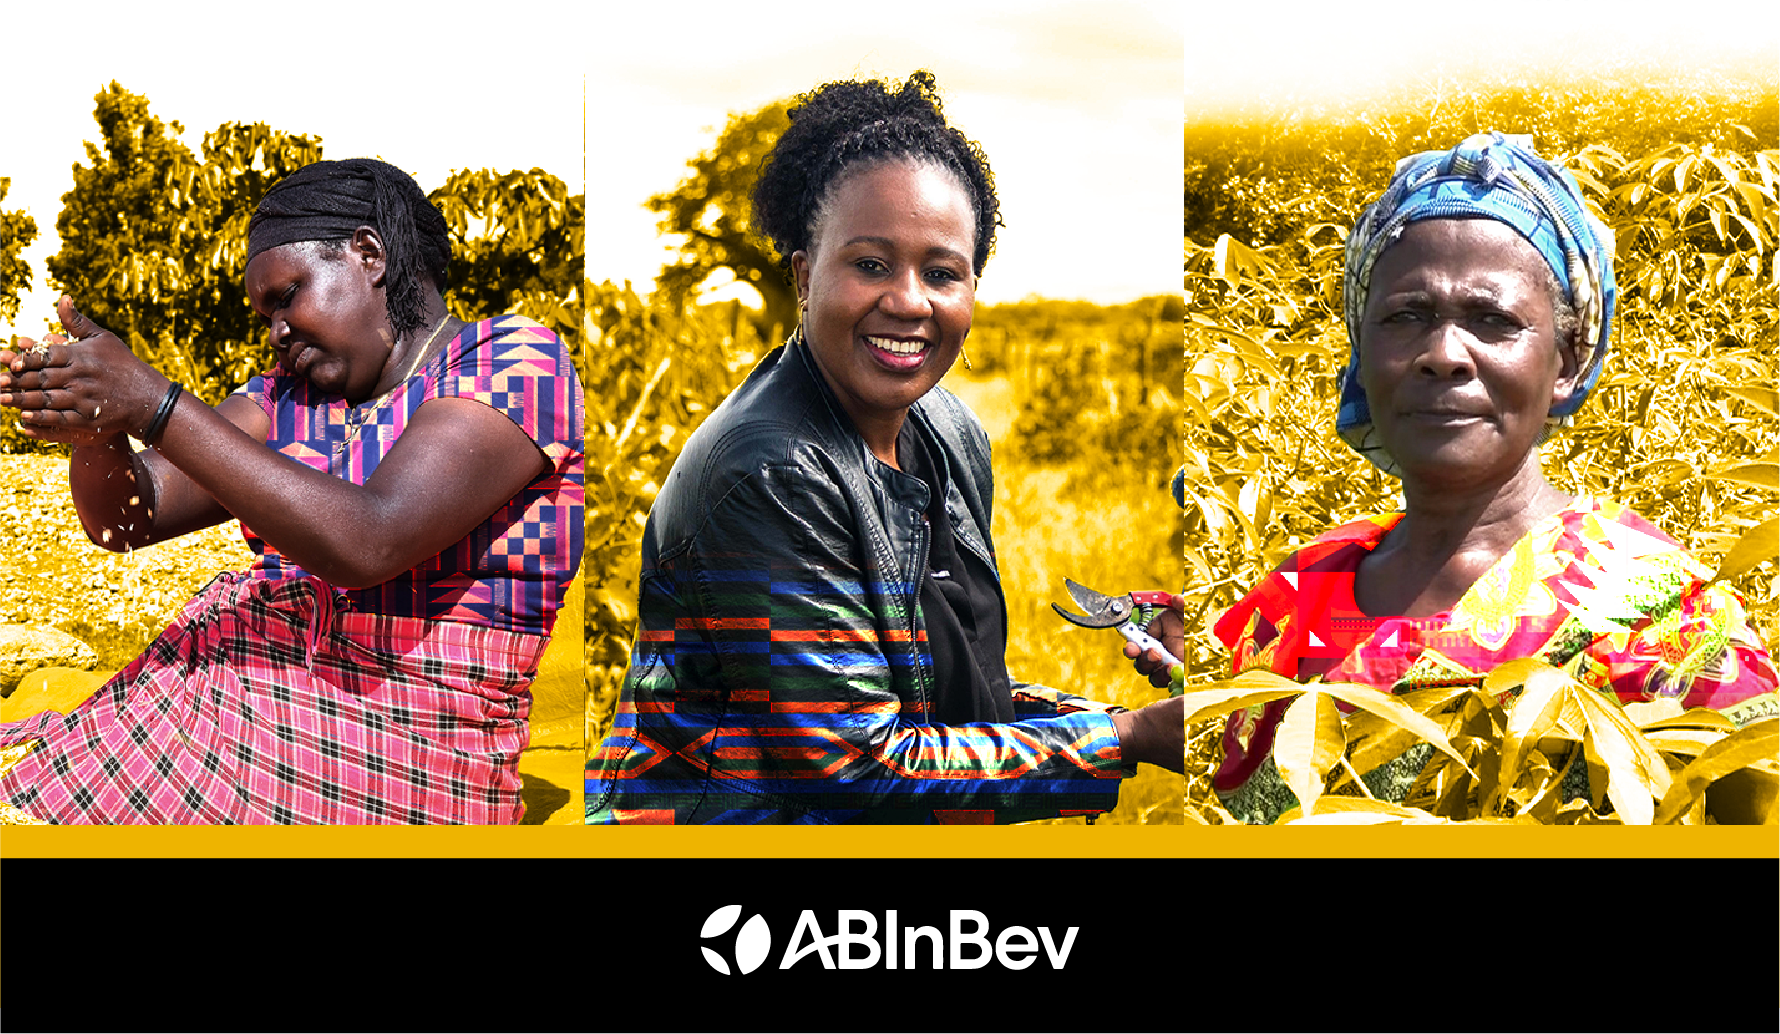 Winnie, Idah, Eva and Irene: Meet the #ABInBevFutureMakers growing our ingredients and their businesses